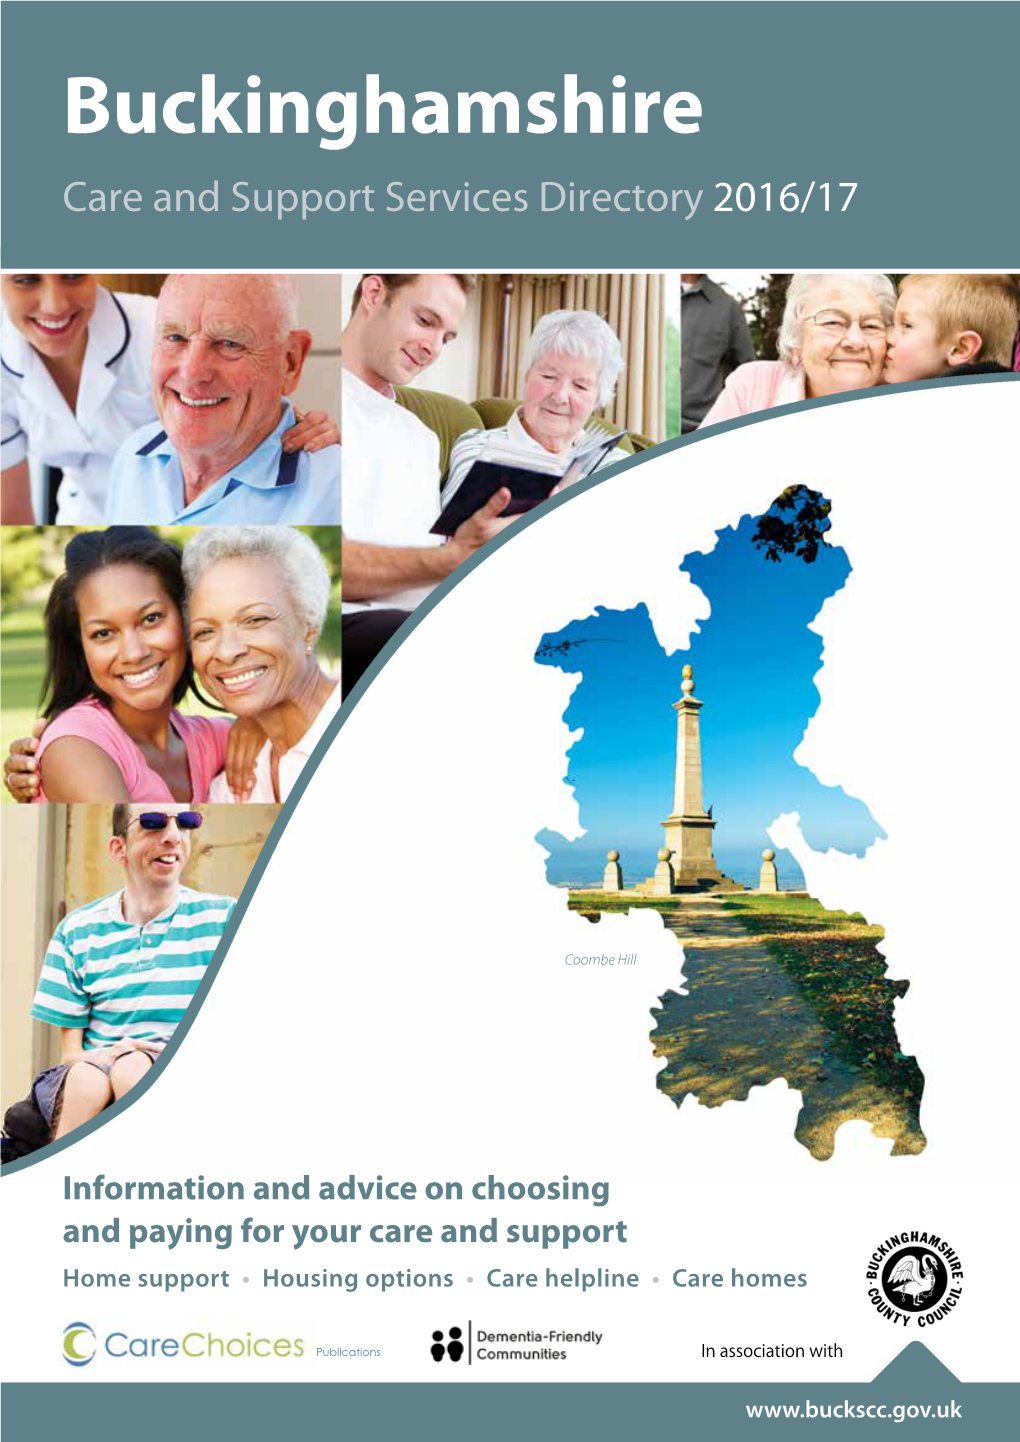 Buckinghamshire Care and Support Services Directory 2016/17